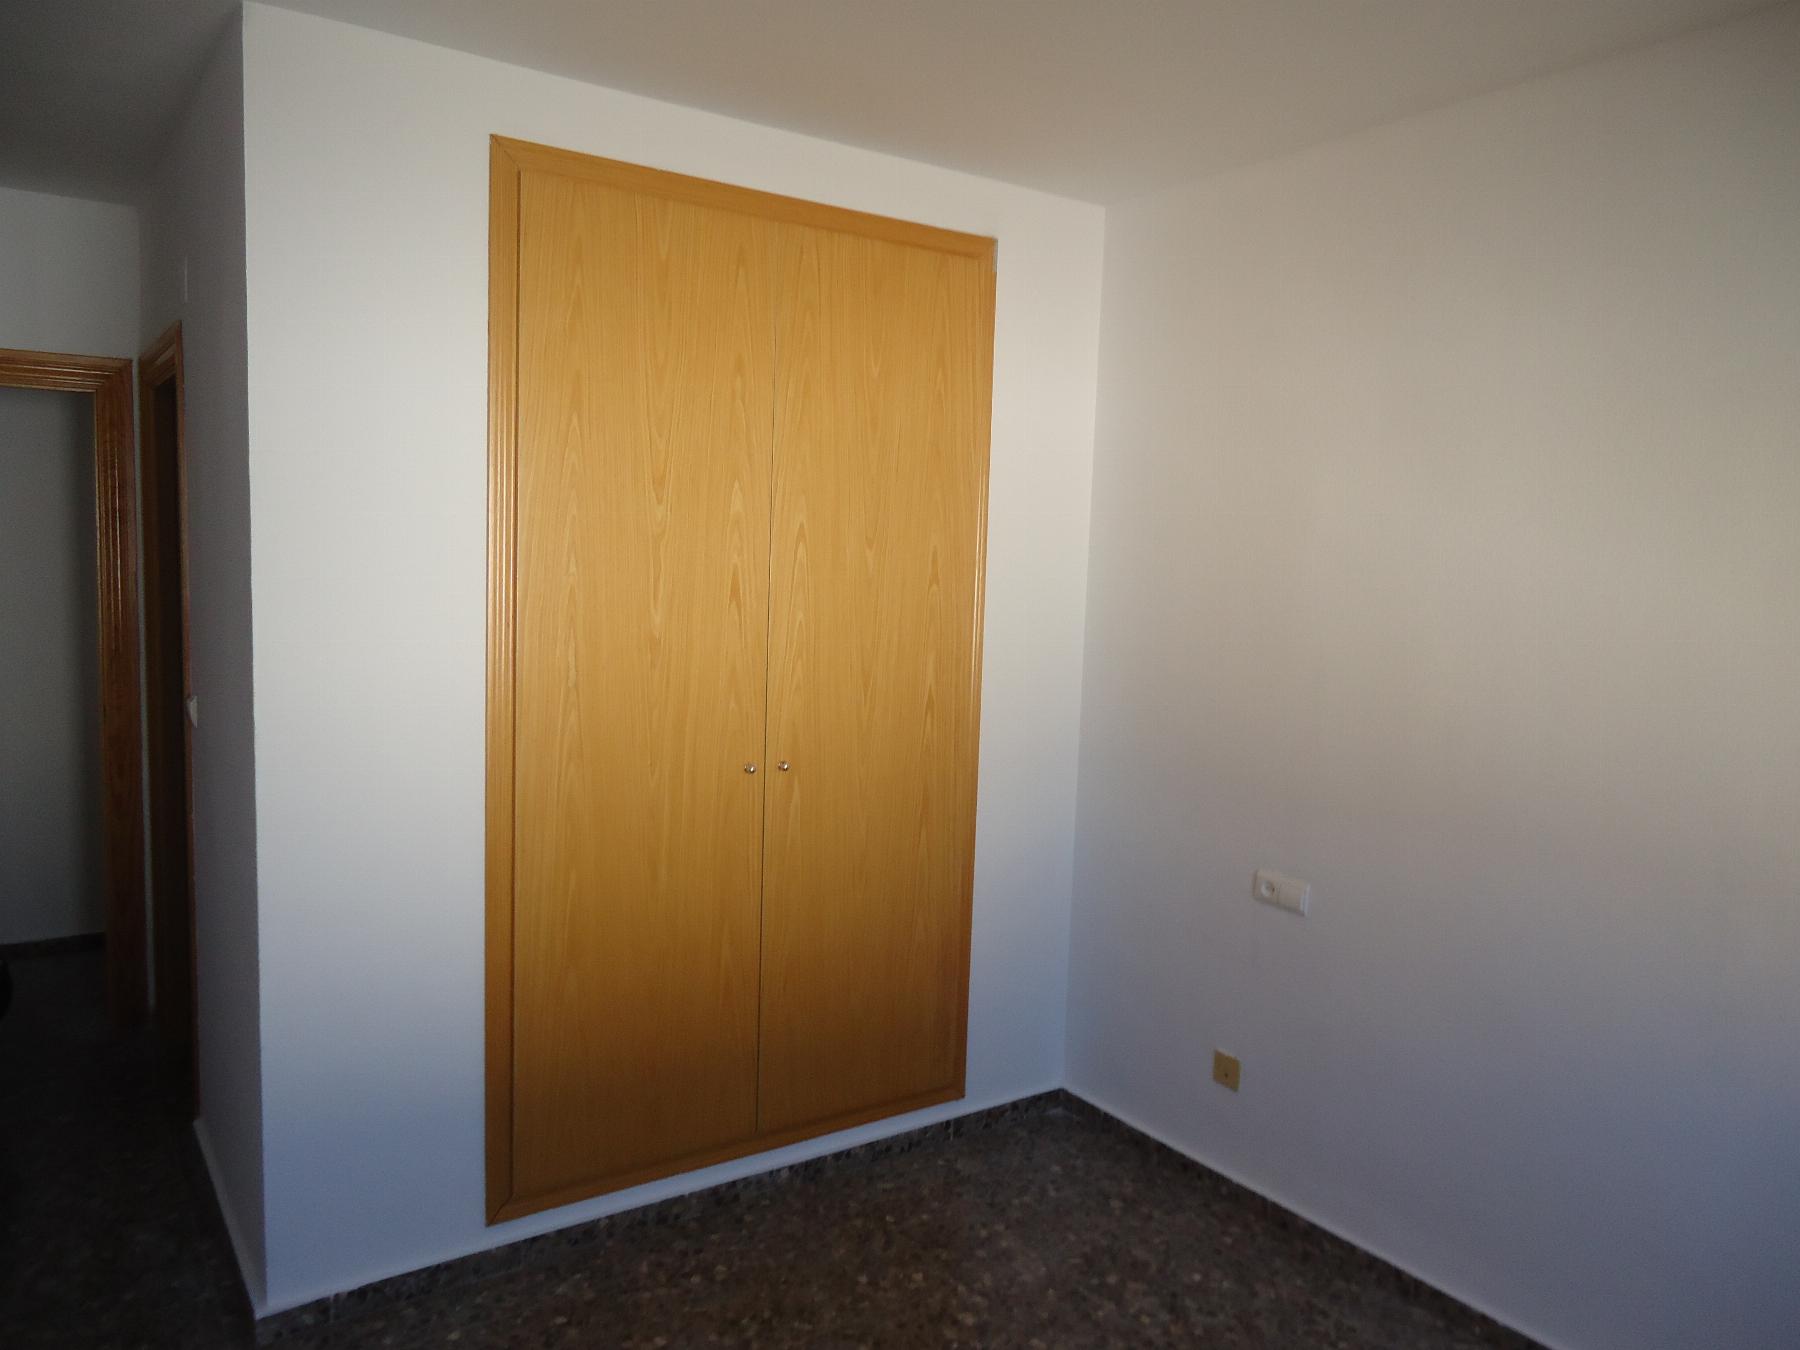 For sale of flat in Vilamarxant